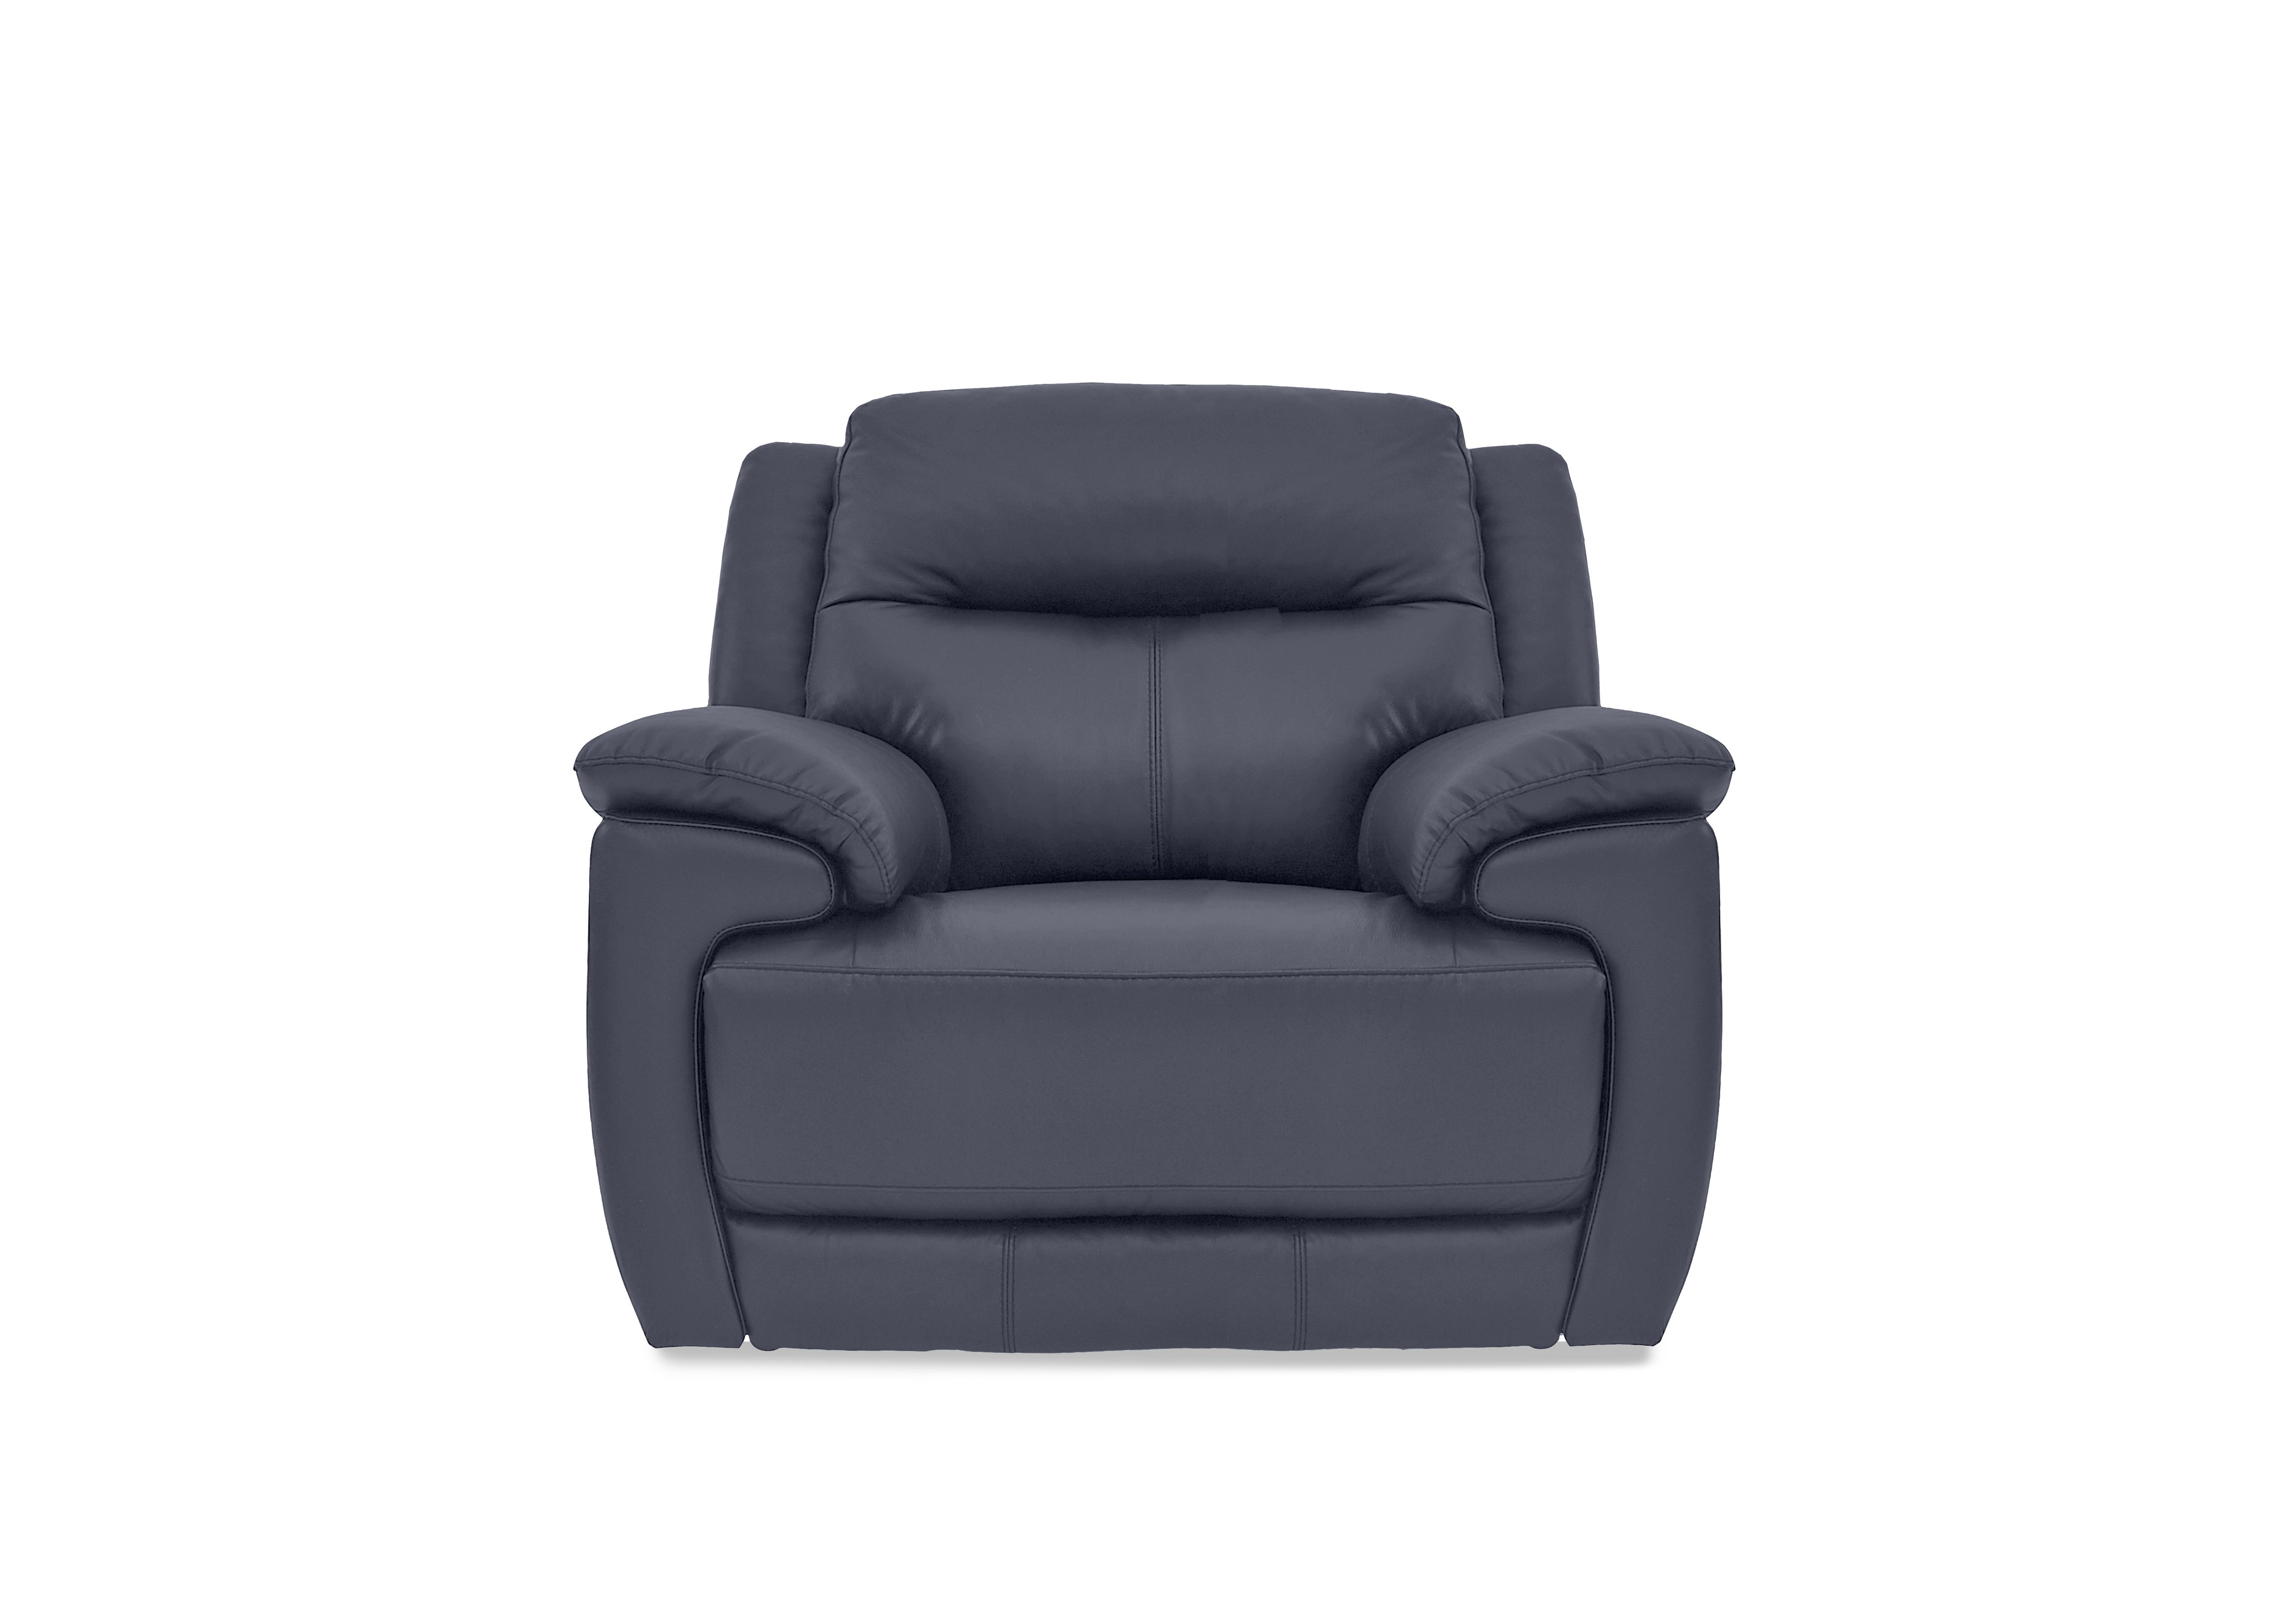 Touch Leather Armchair in Bv-313e Ocean Blue on Furniture Village